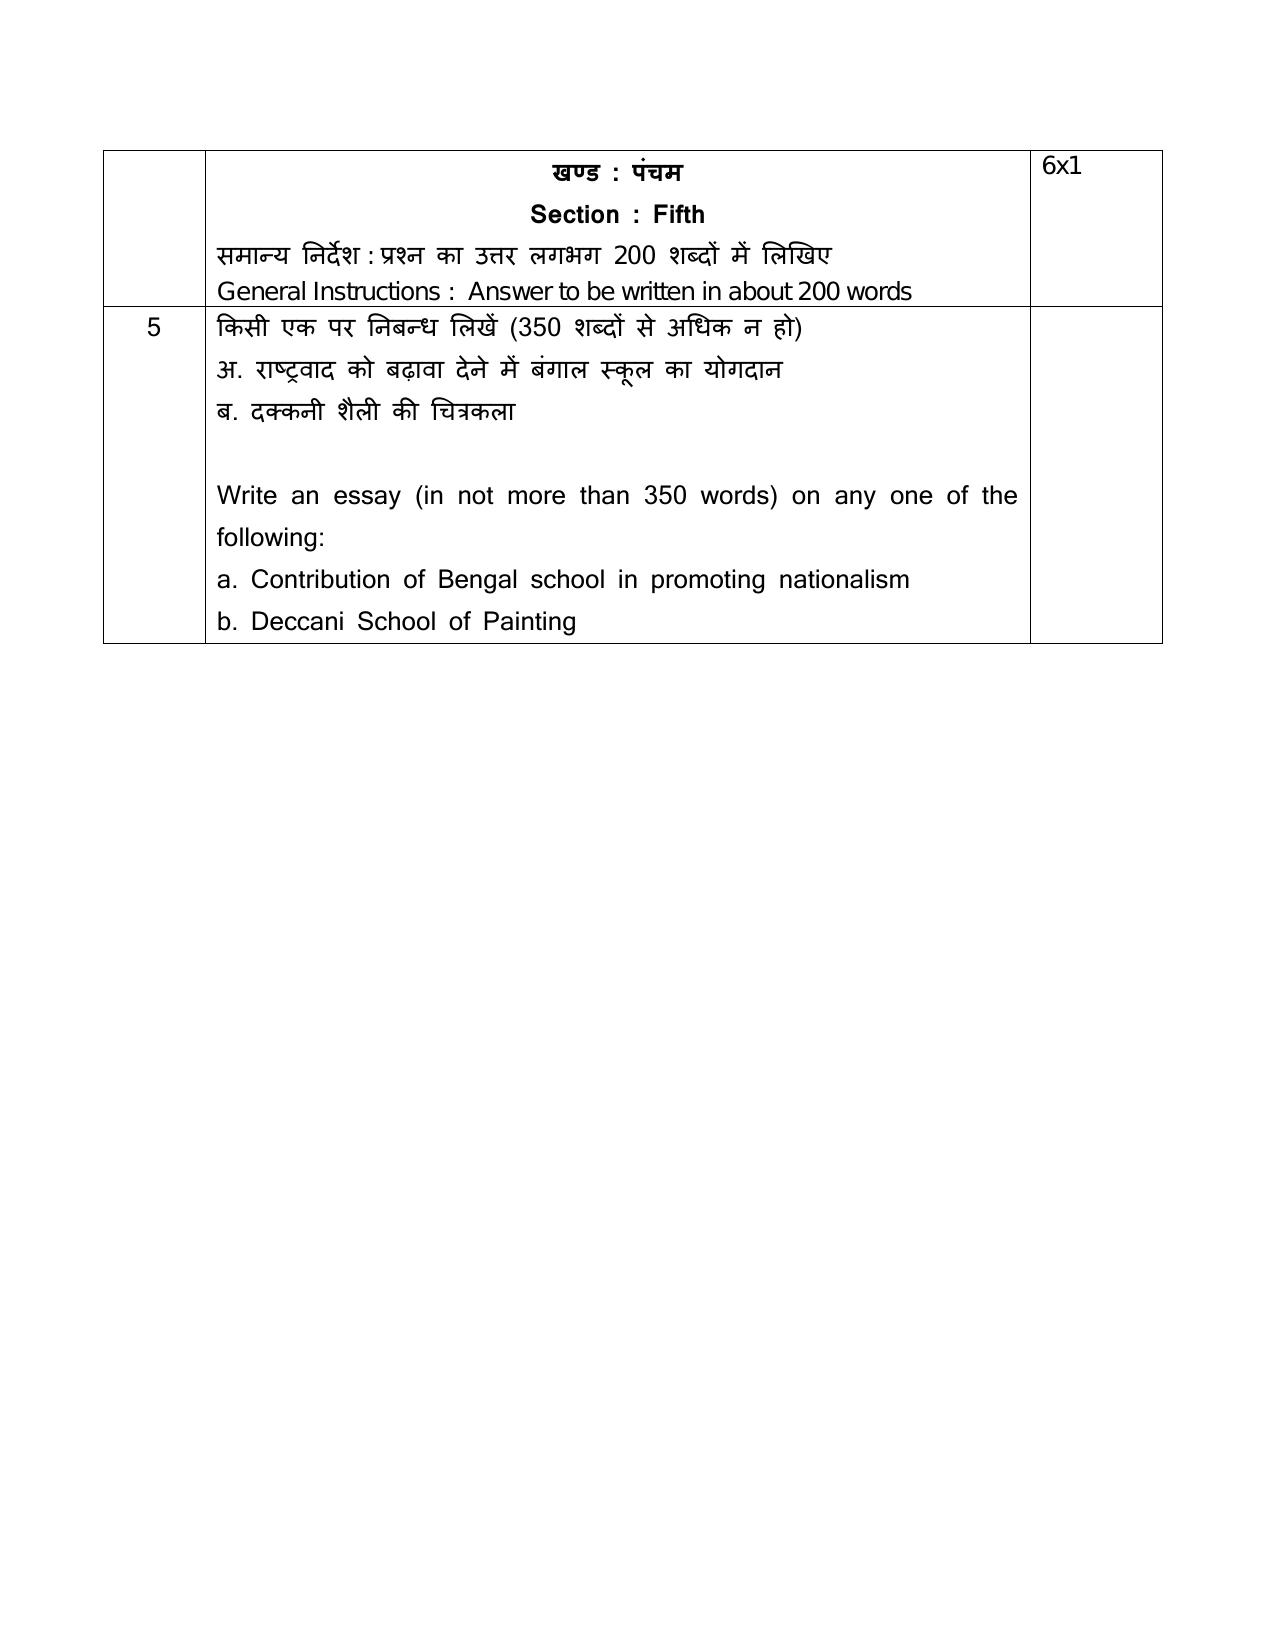 CBSE Class 12 Painting -Sample Paper 2019-20 - Page 6